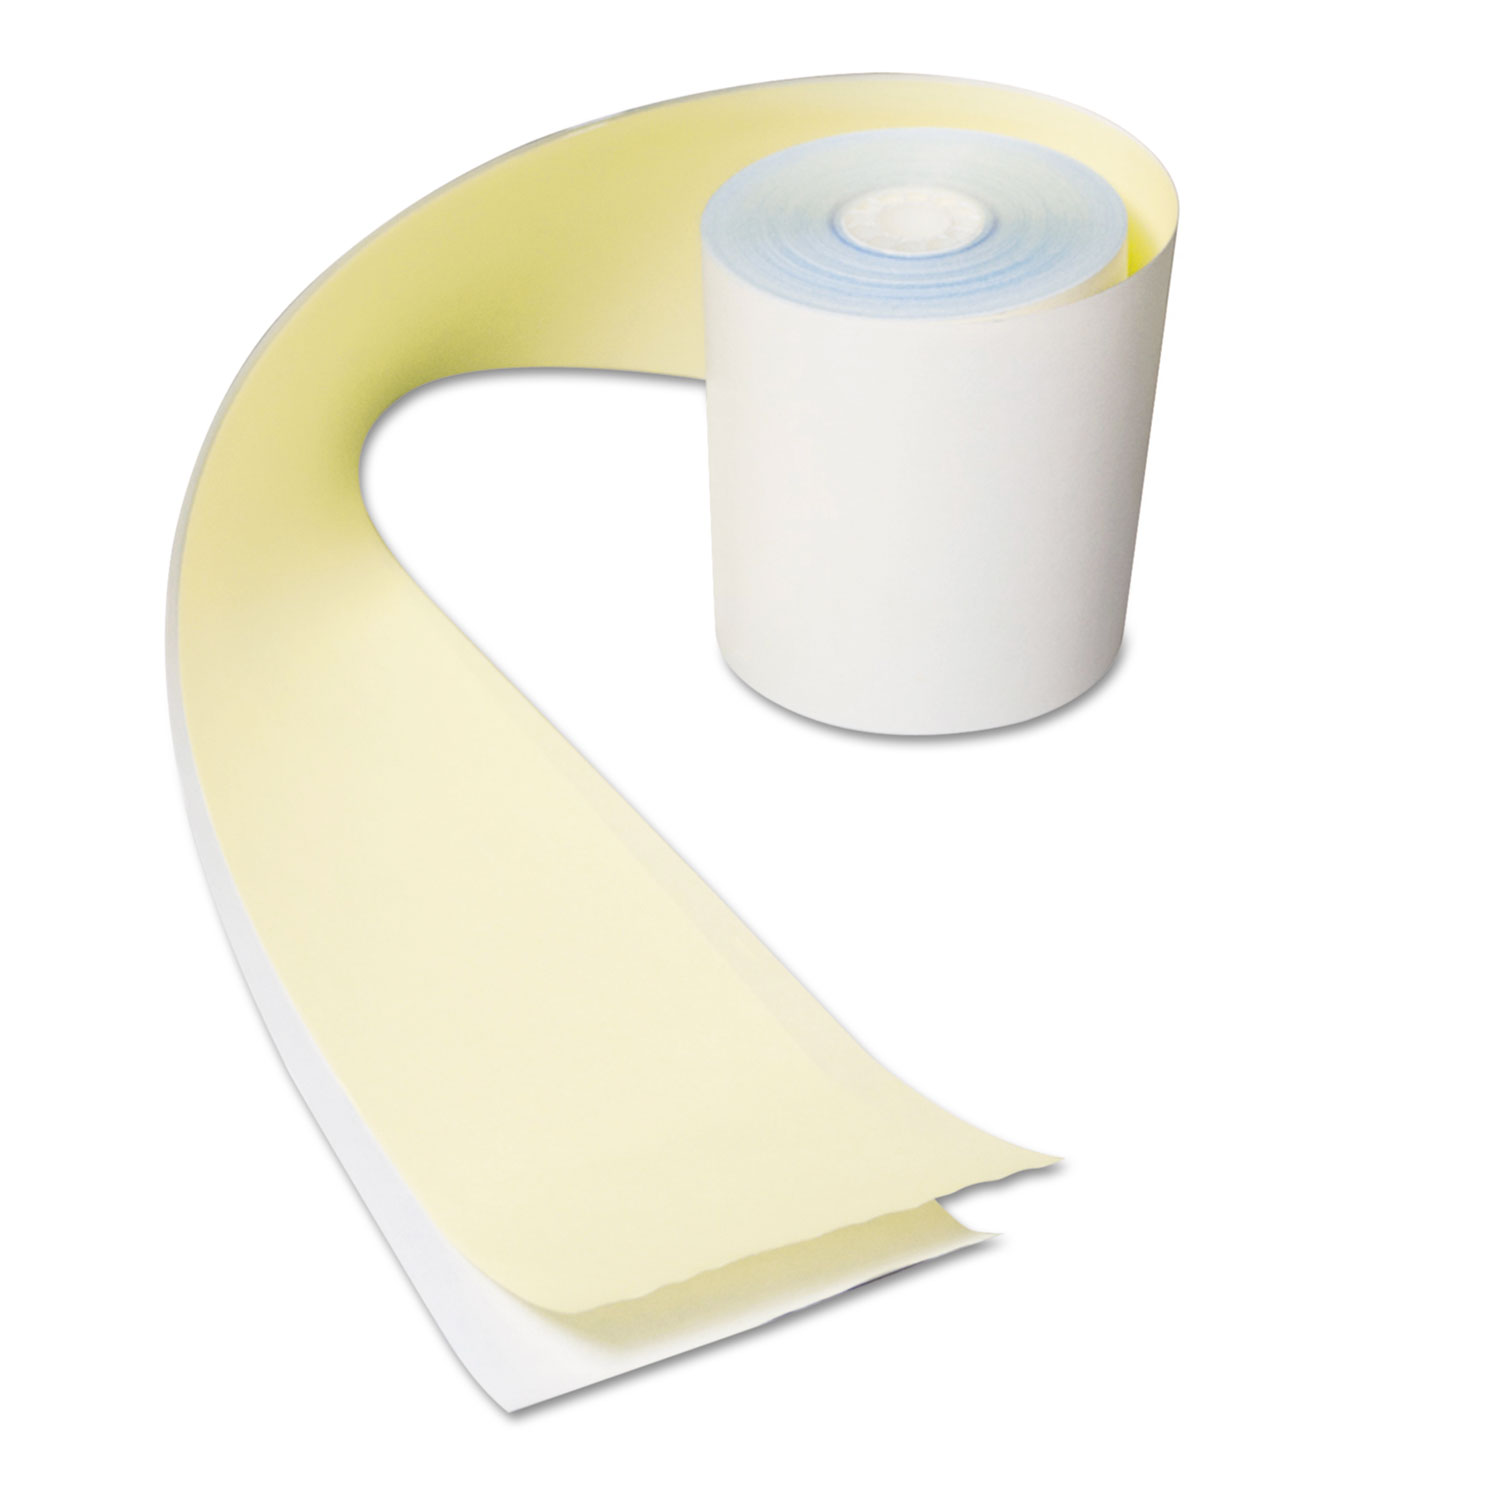 Register Roll, 3 in x 90 ft, 2 Ply, No Carbon, 30/Carton